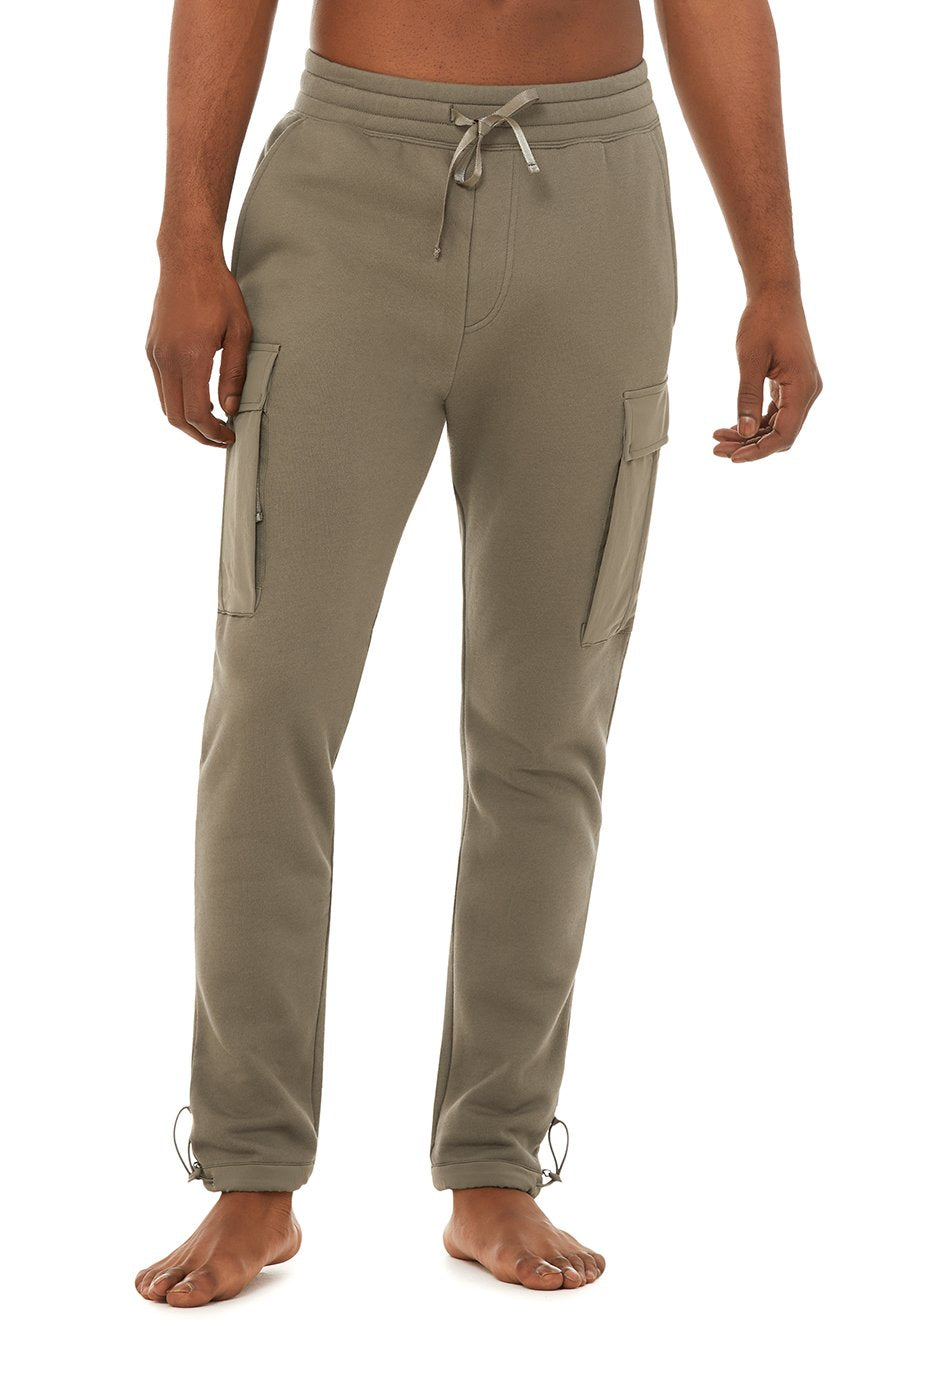 Cargo Traverse Sweatpant in Olive Branch by Alo Yoga - Work Well Daily